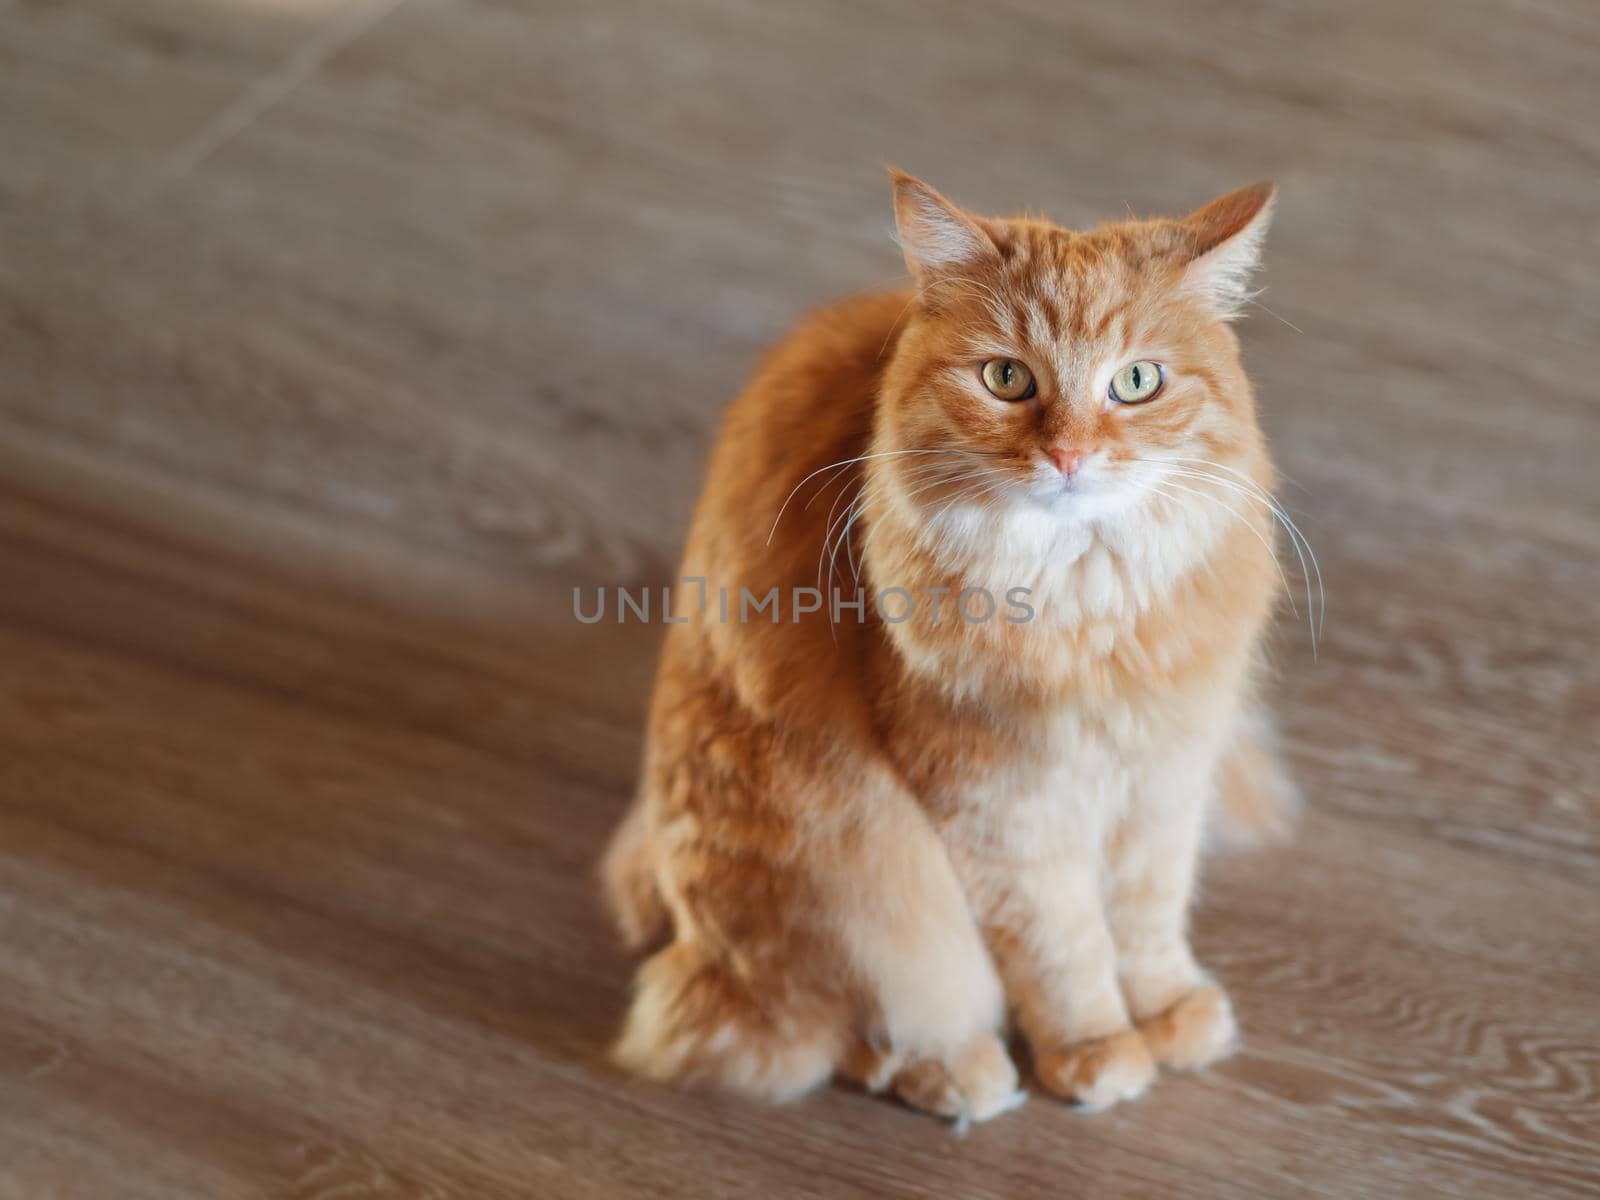 Cute ginger cat on wooden floor. Fluffy pet is gazing curiously. Fuzzy domestic animal. by aksenovko